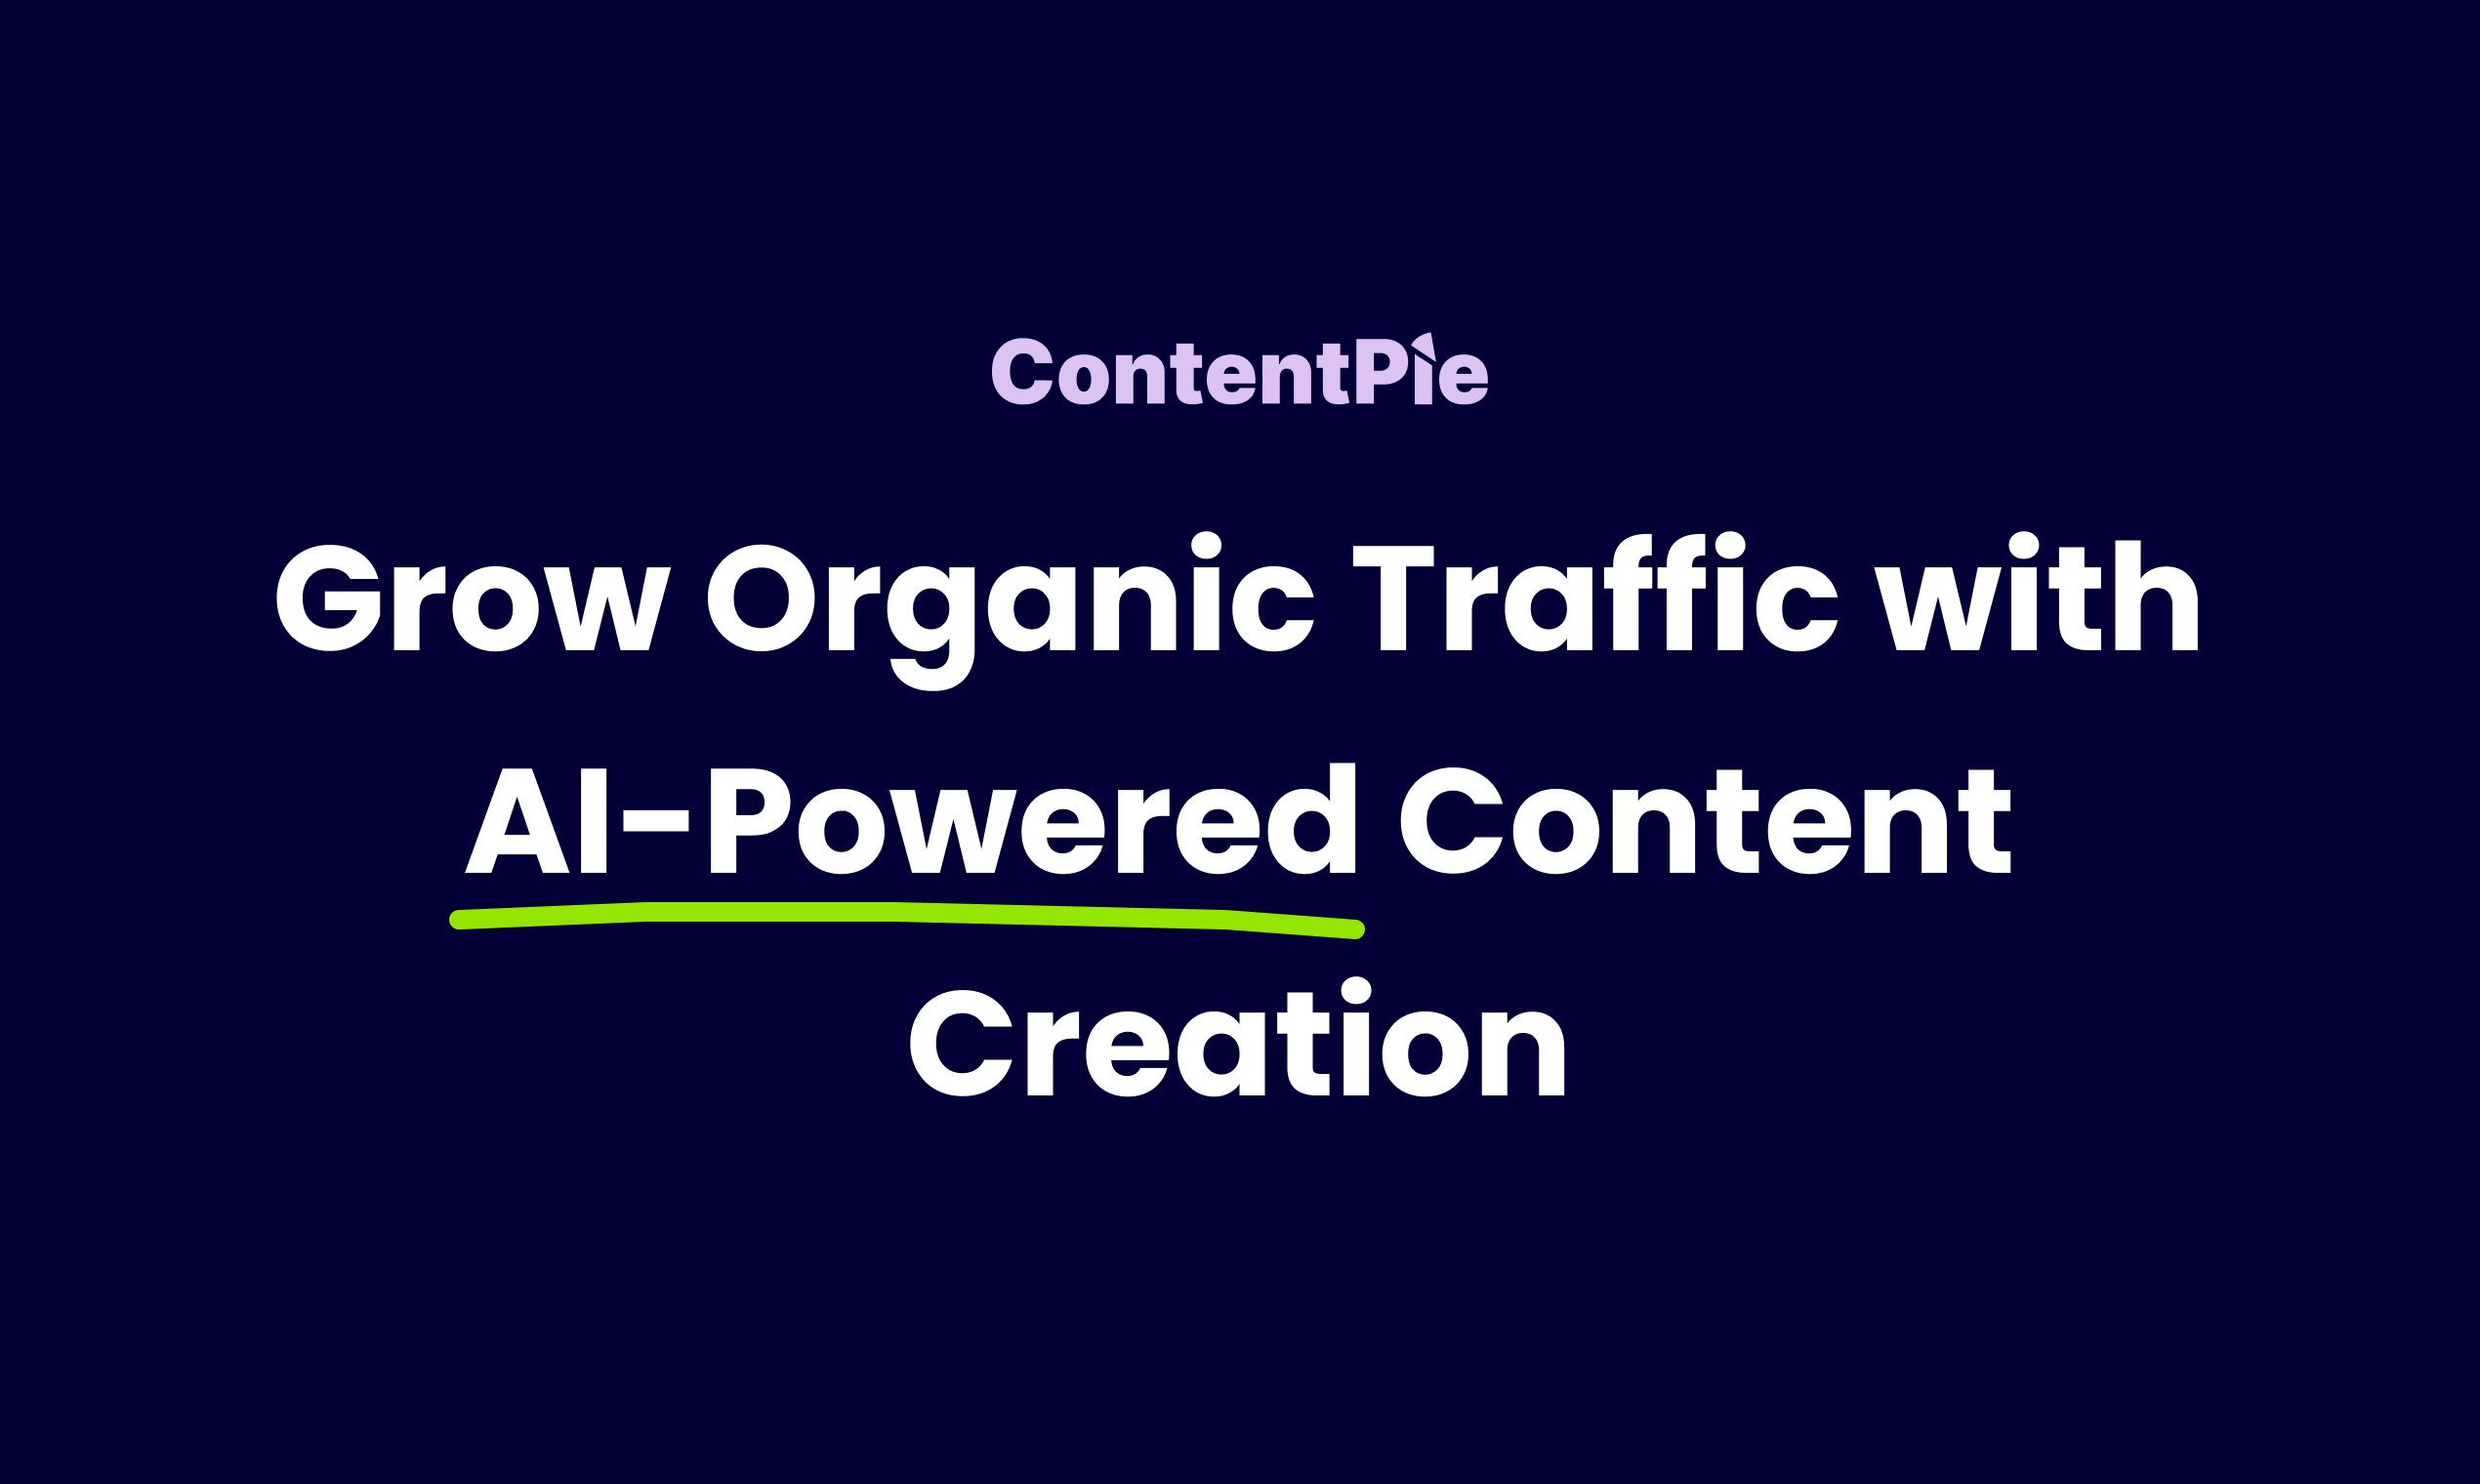 contentpie - Grow organic traffic with AI powered content creation